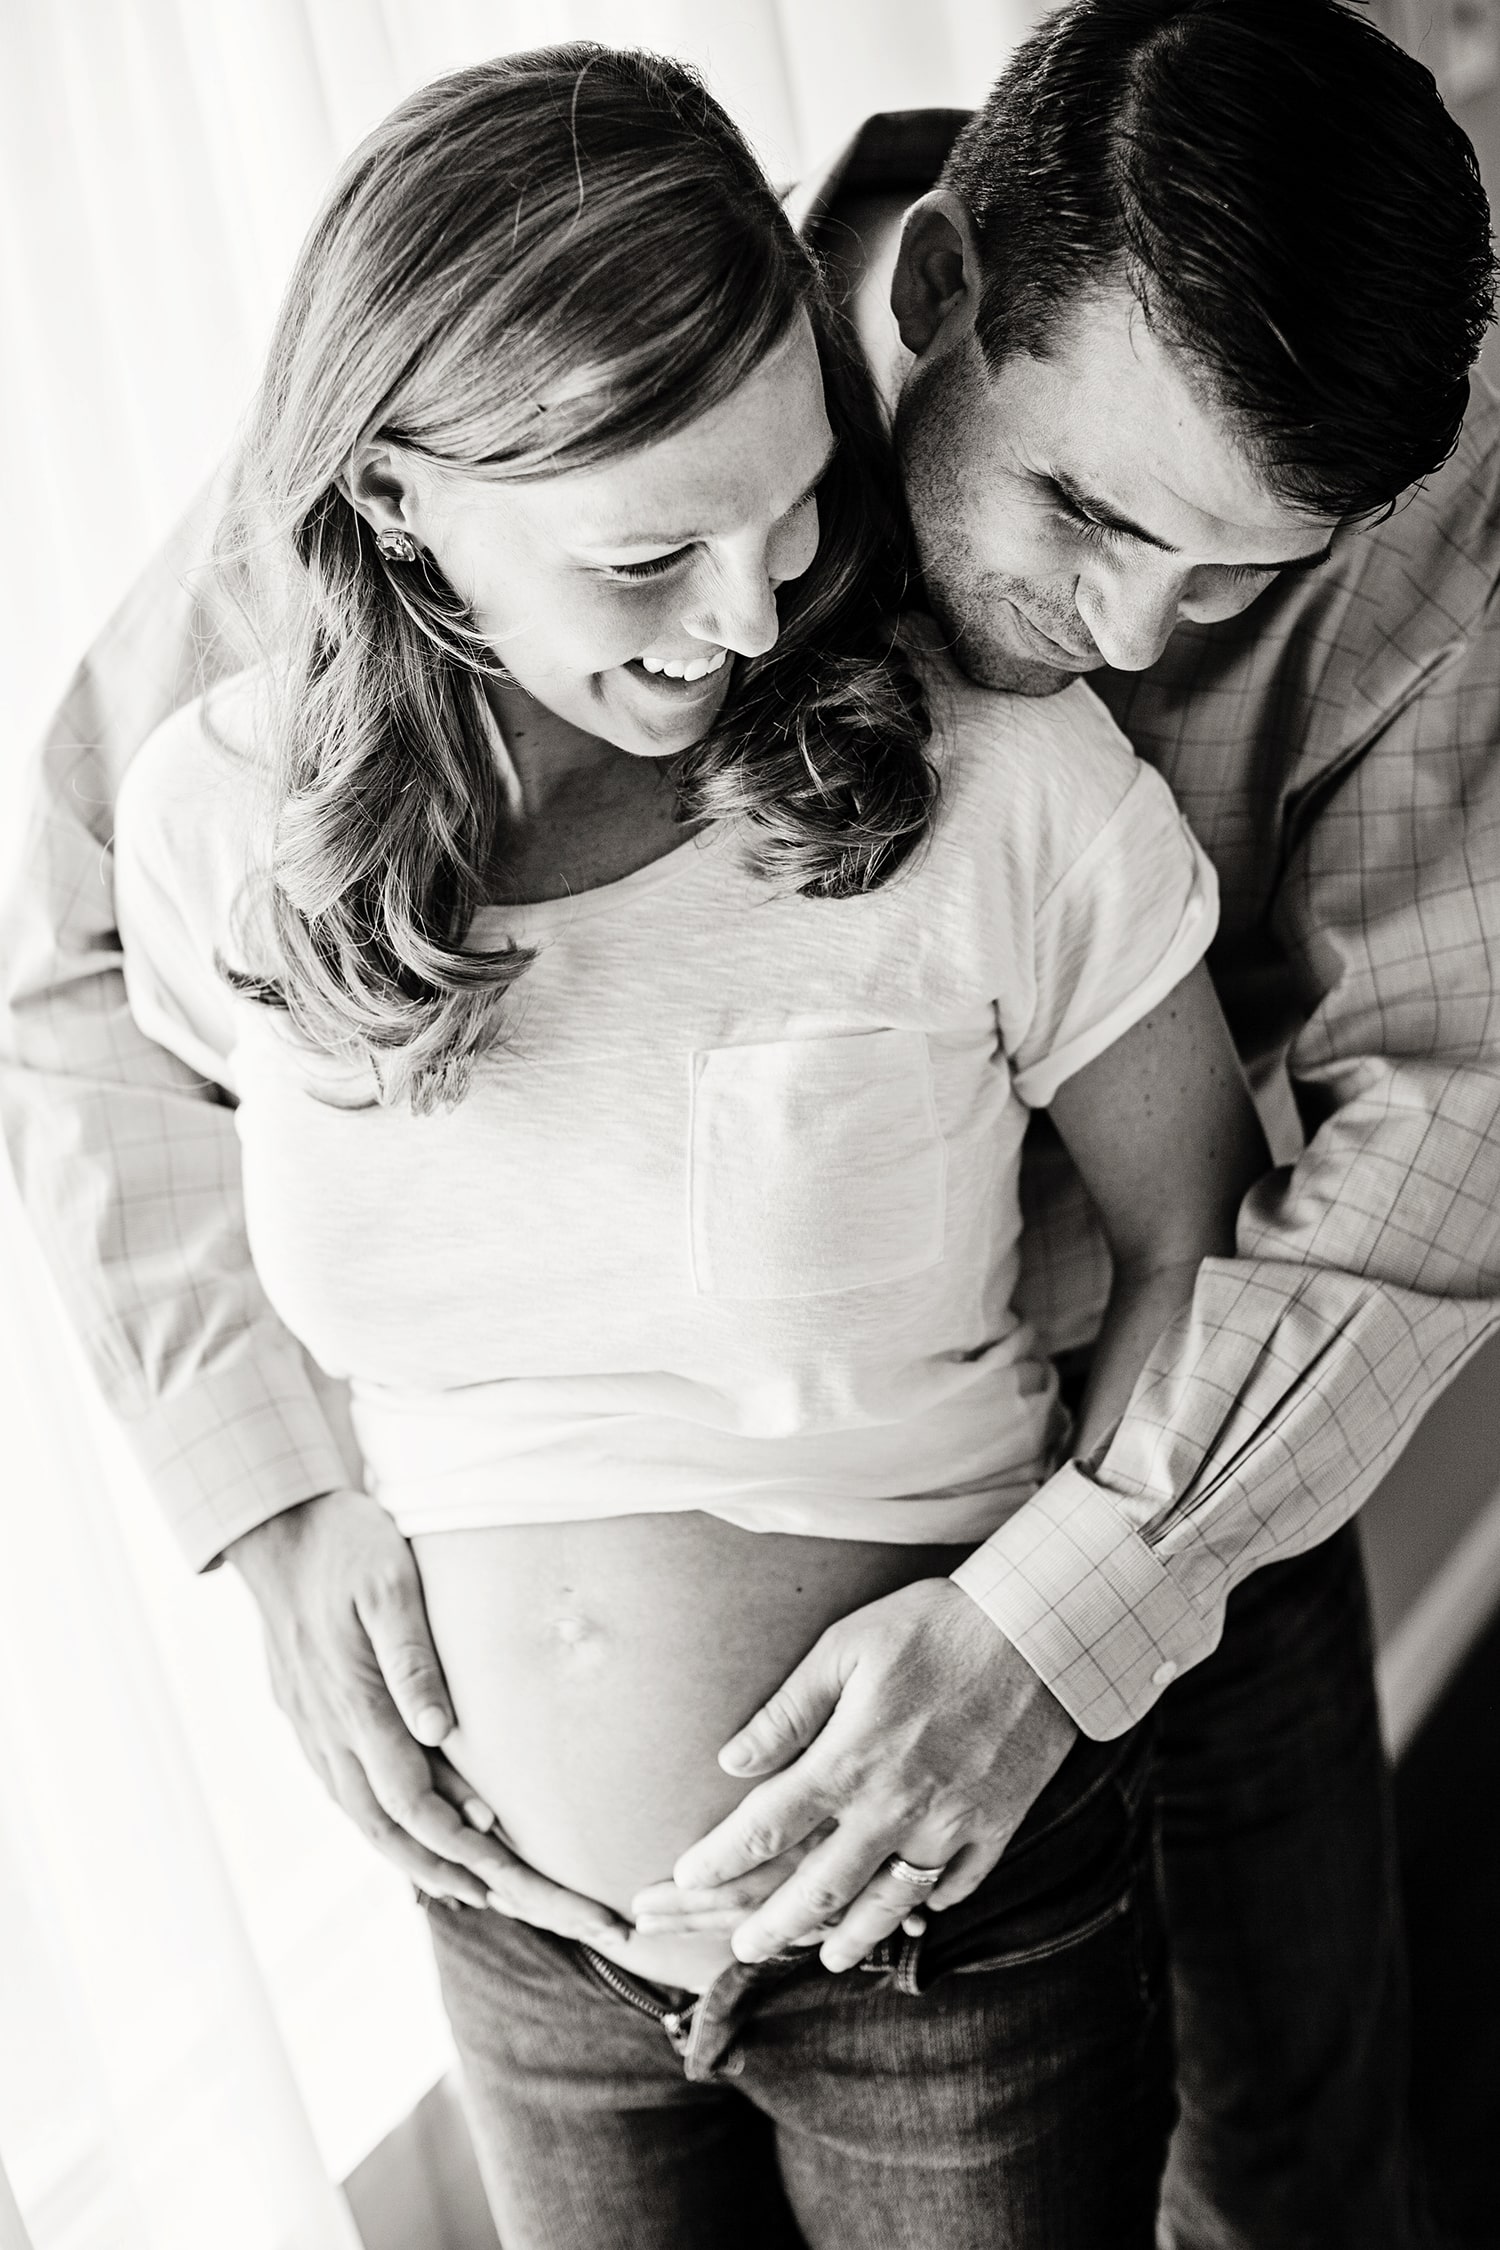 A husband and wife smile while he touches her belly.